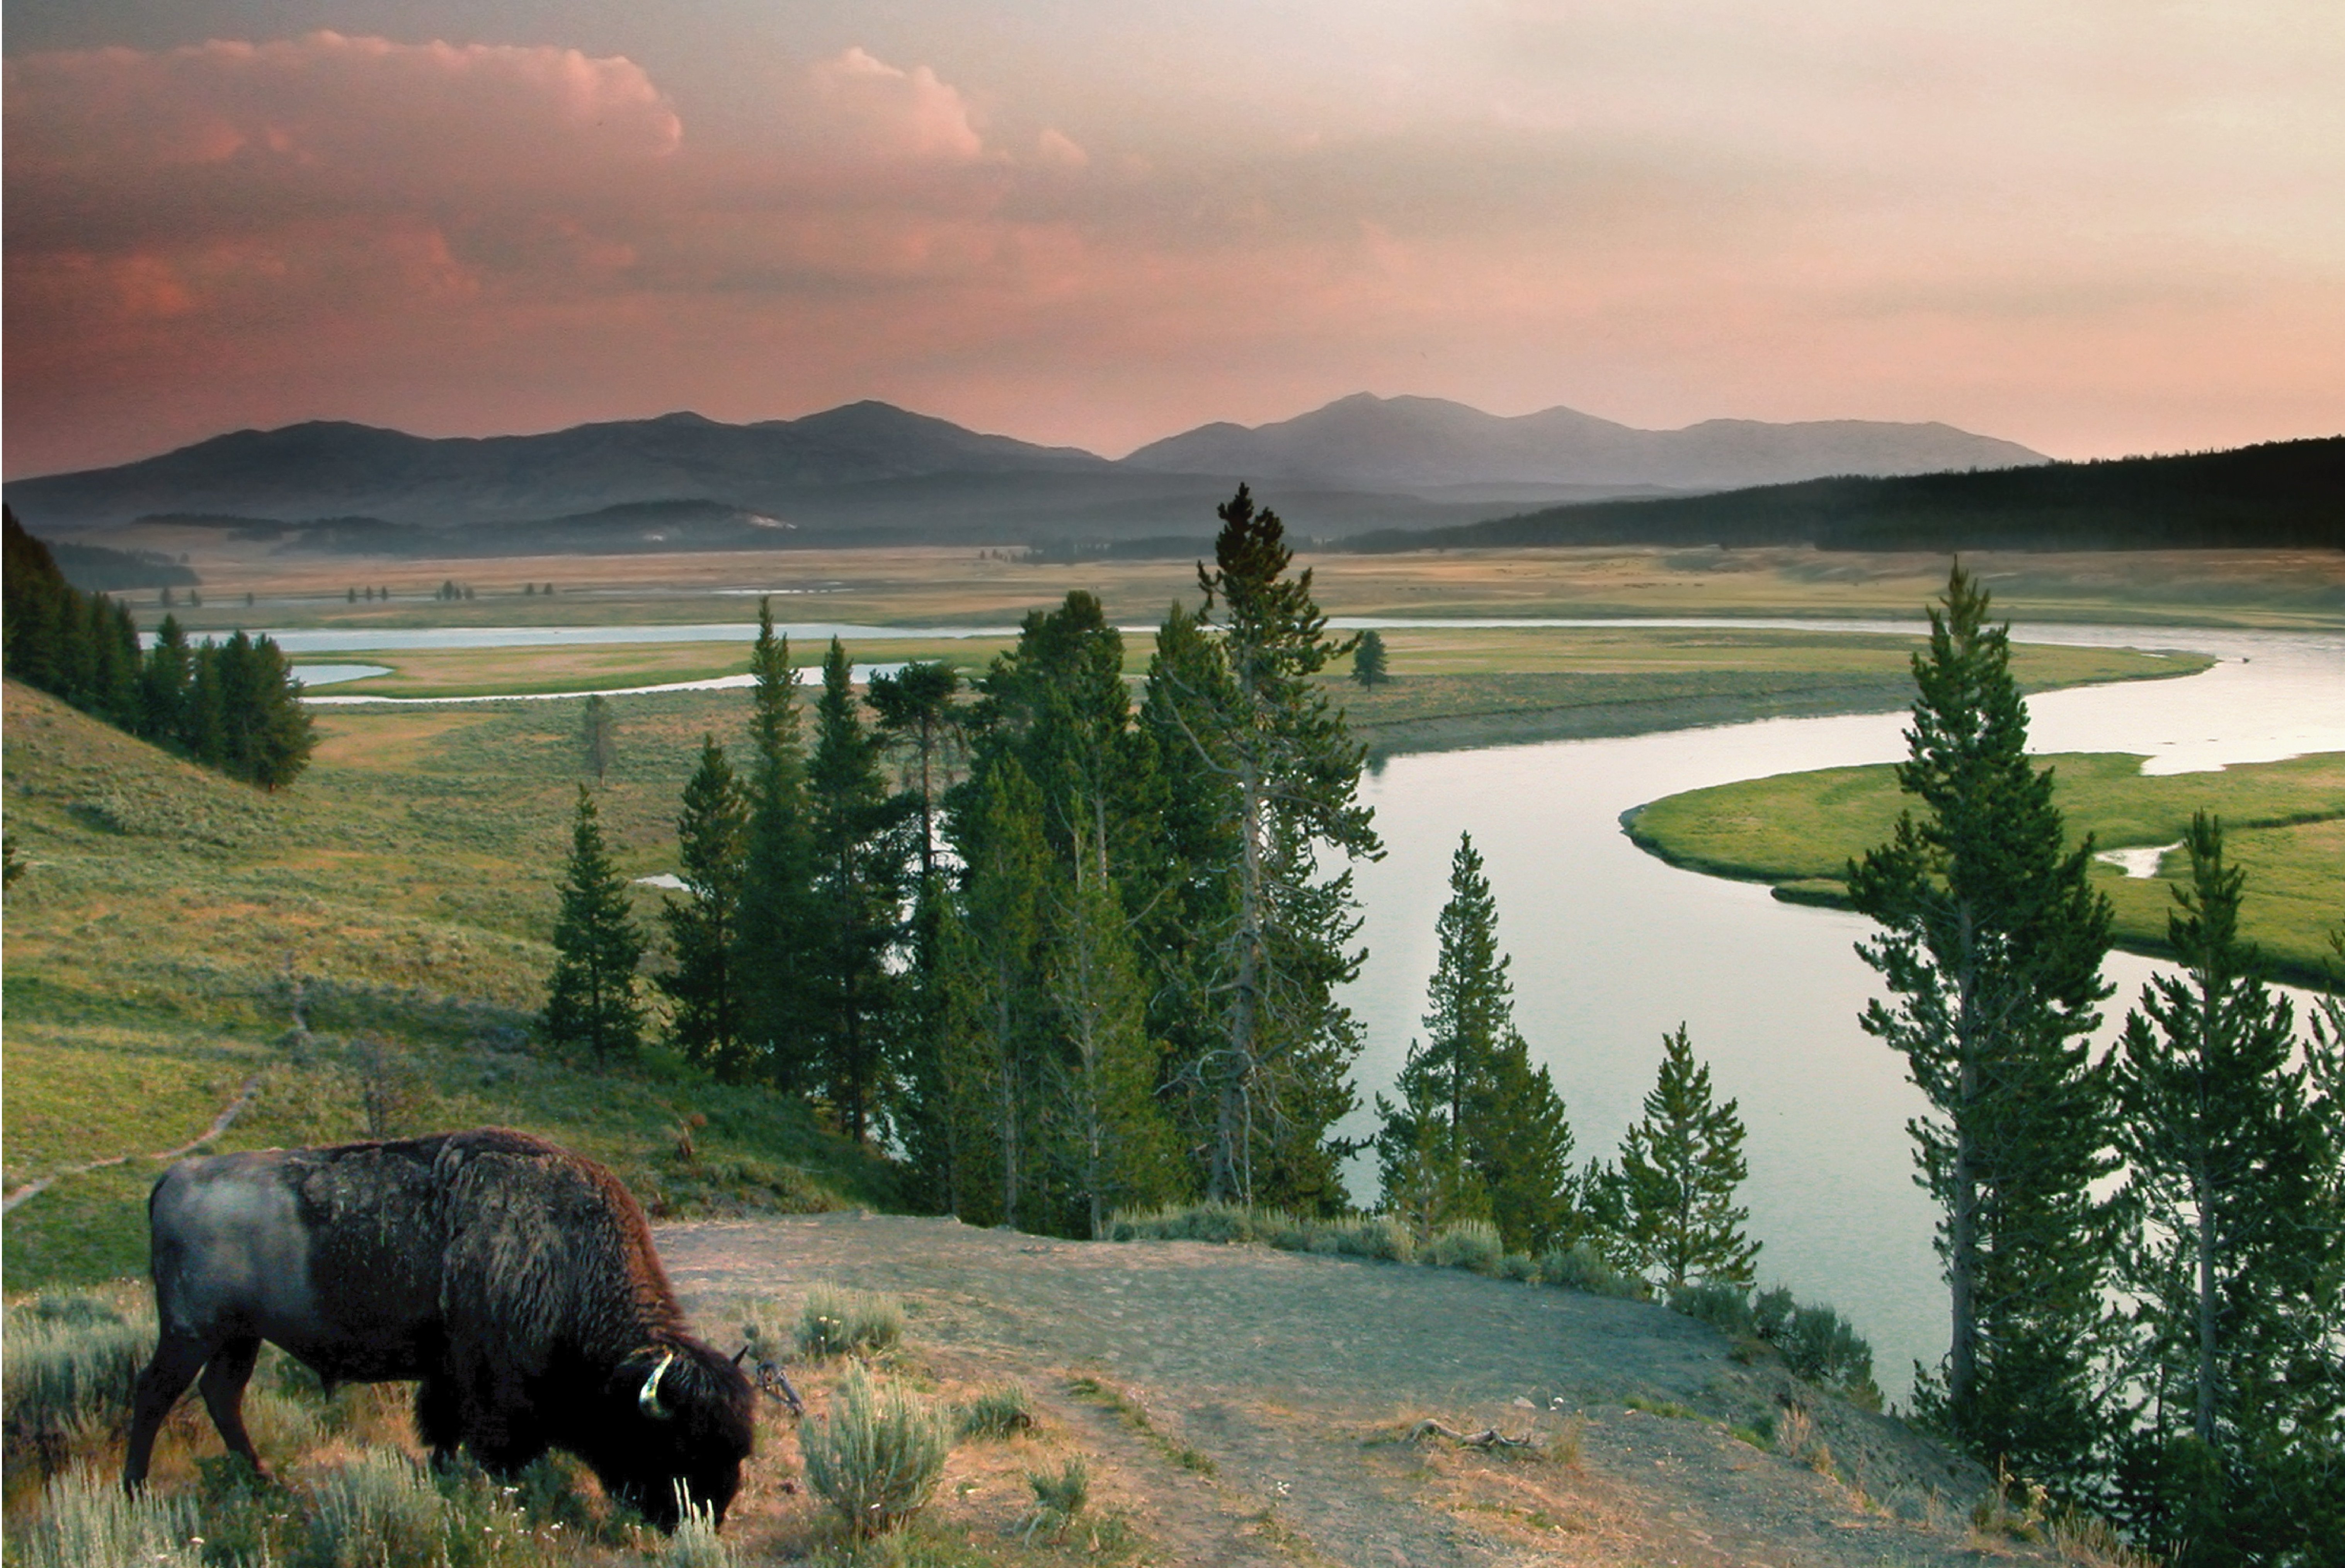 a bison feeding near the yellowstone river